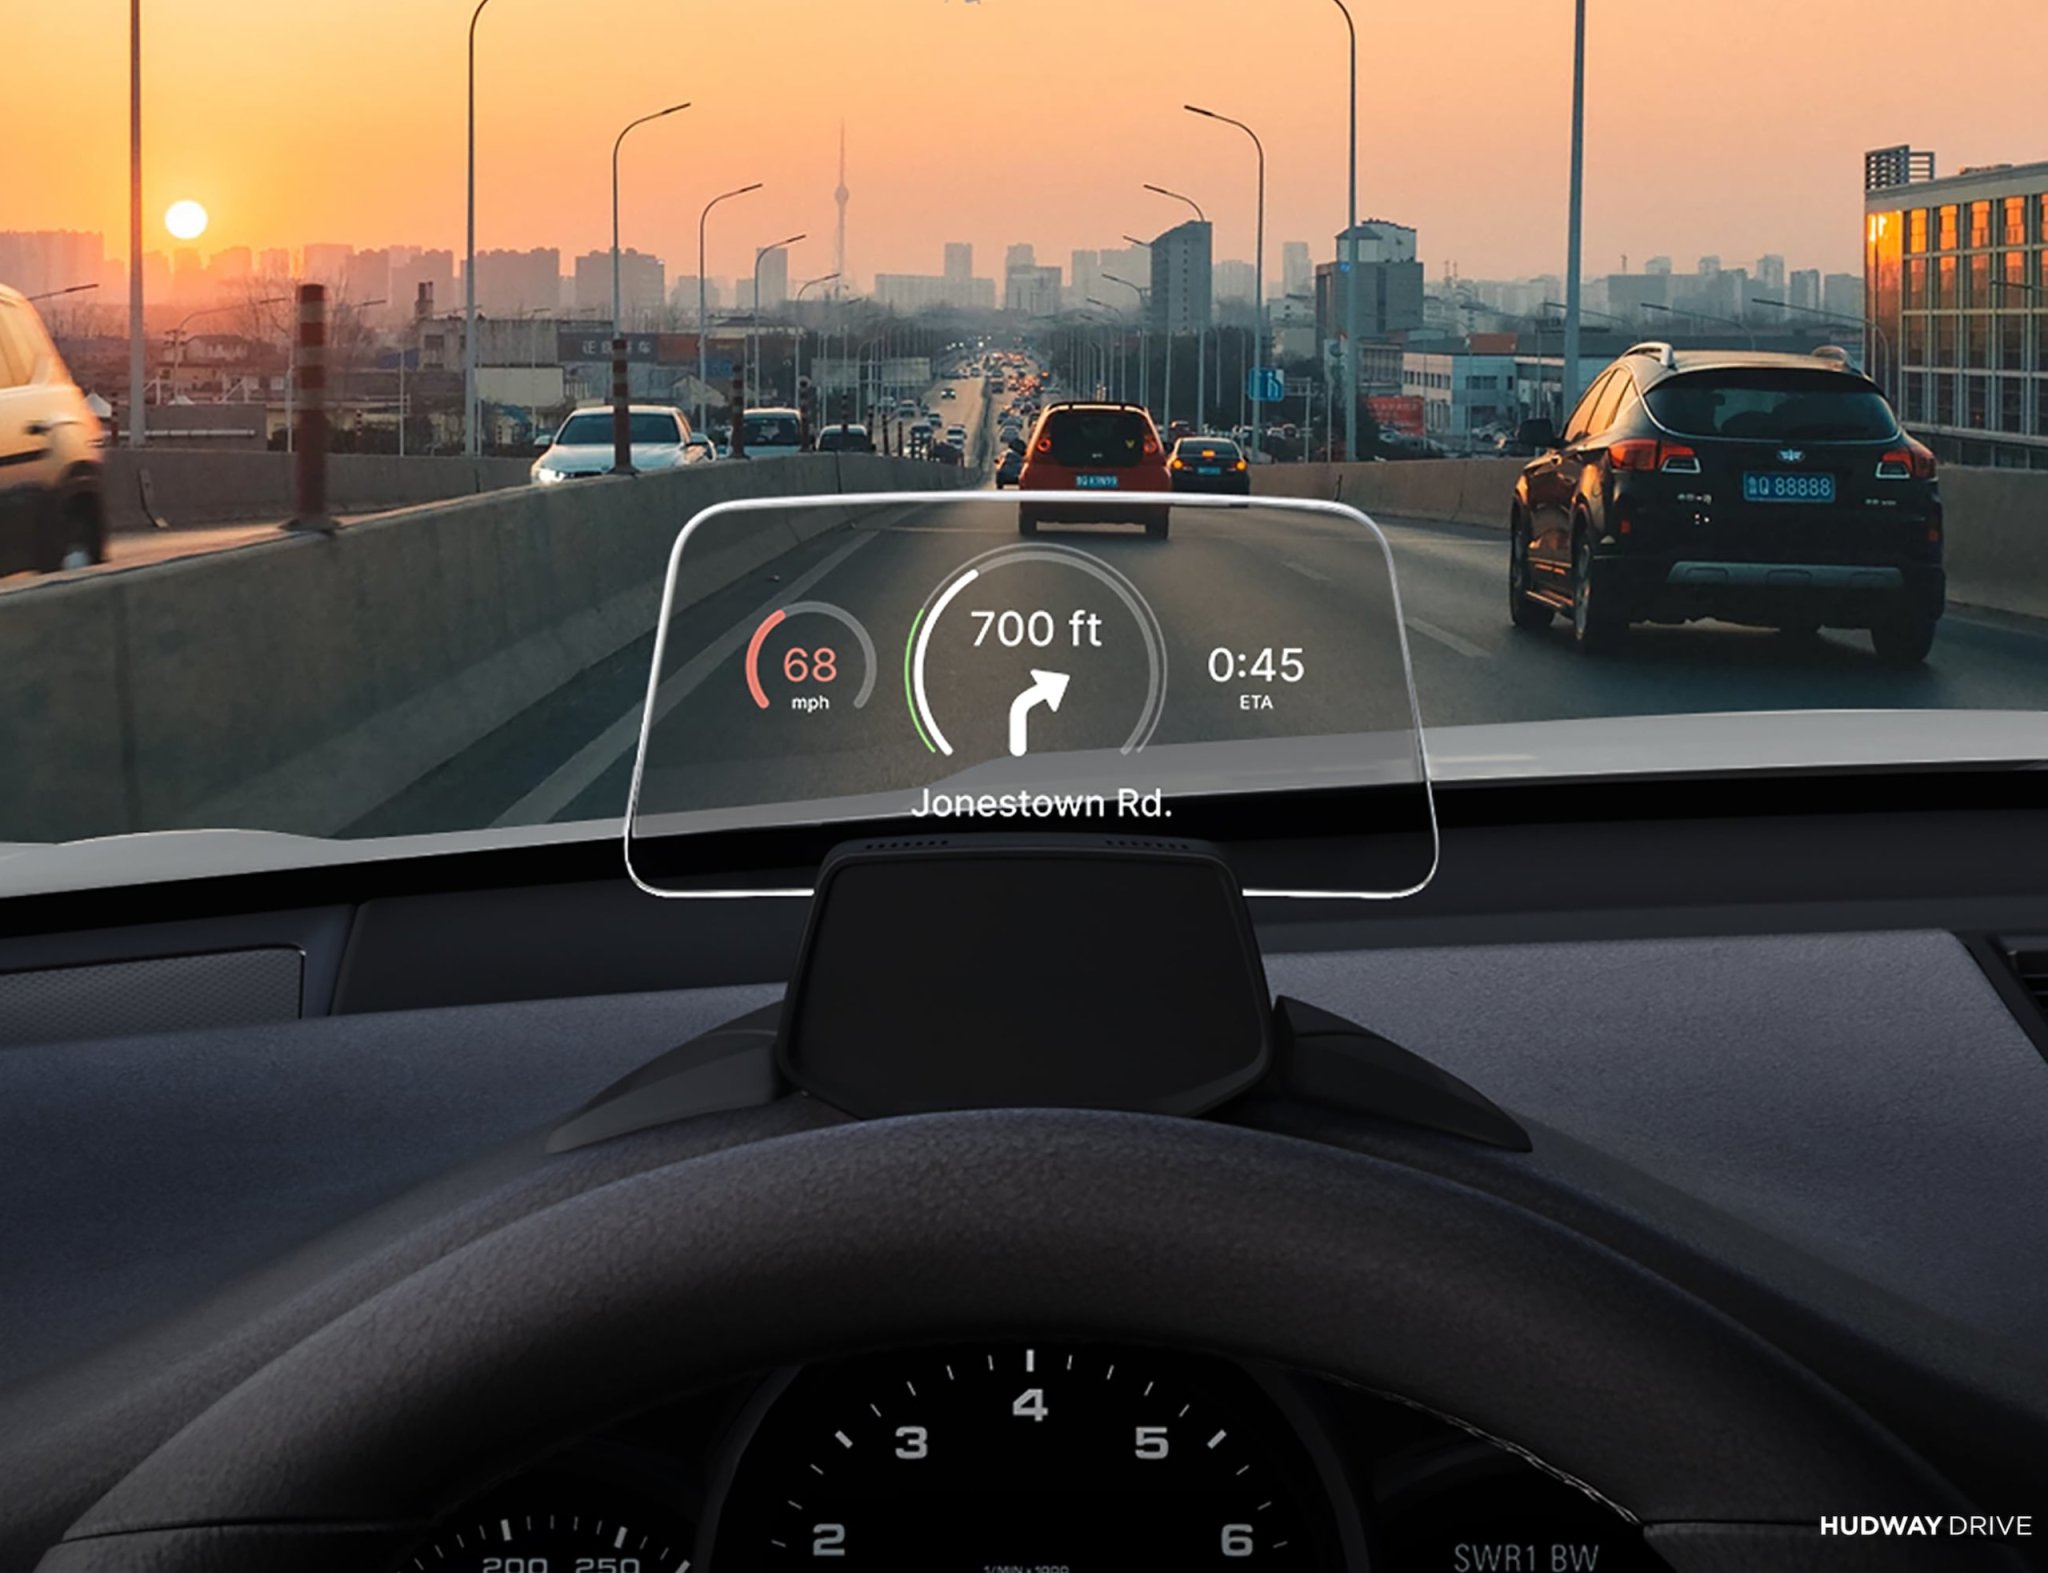 HUDWAY Drive Portable Head-Up Display keeps you focused on the road